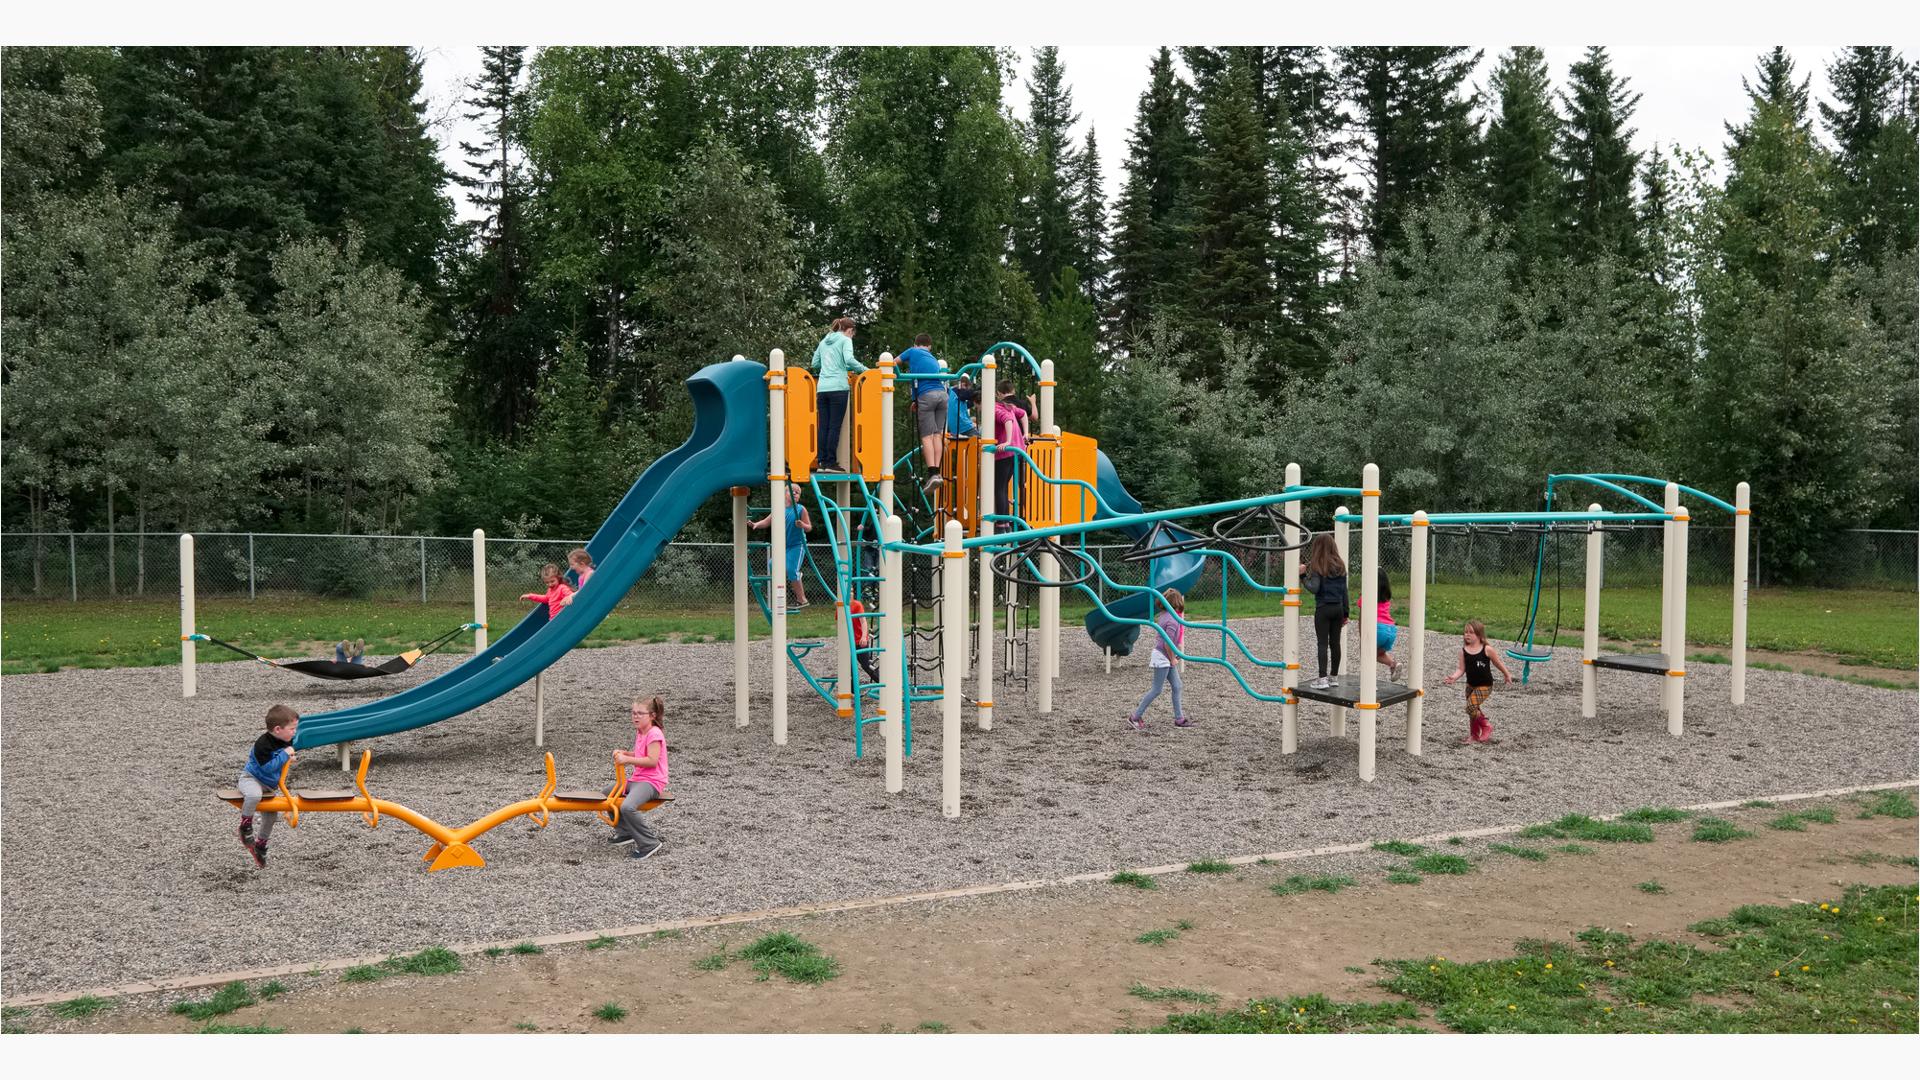 Blue and tangerine playground with many overhead items to play on. Kids playing on see-saw and going down slide. Many kids playing all around the playground. Tall green trees in the background with grey pebbles under the playground structure.